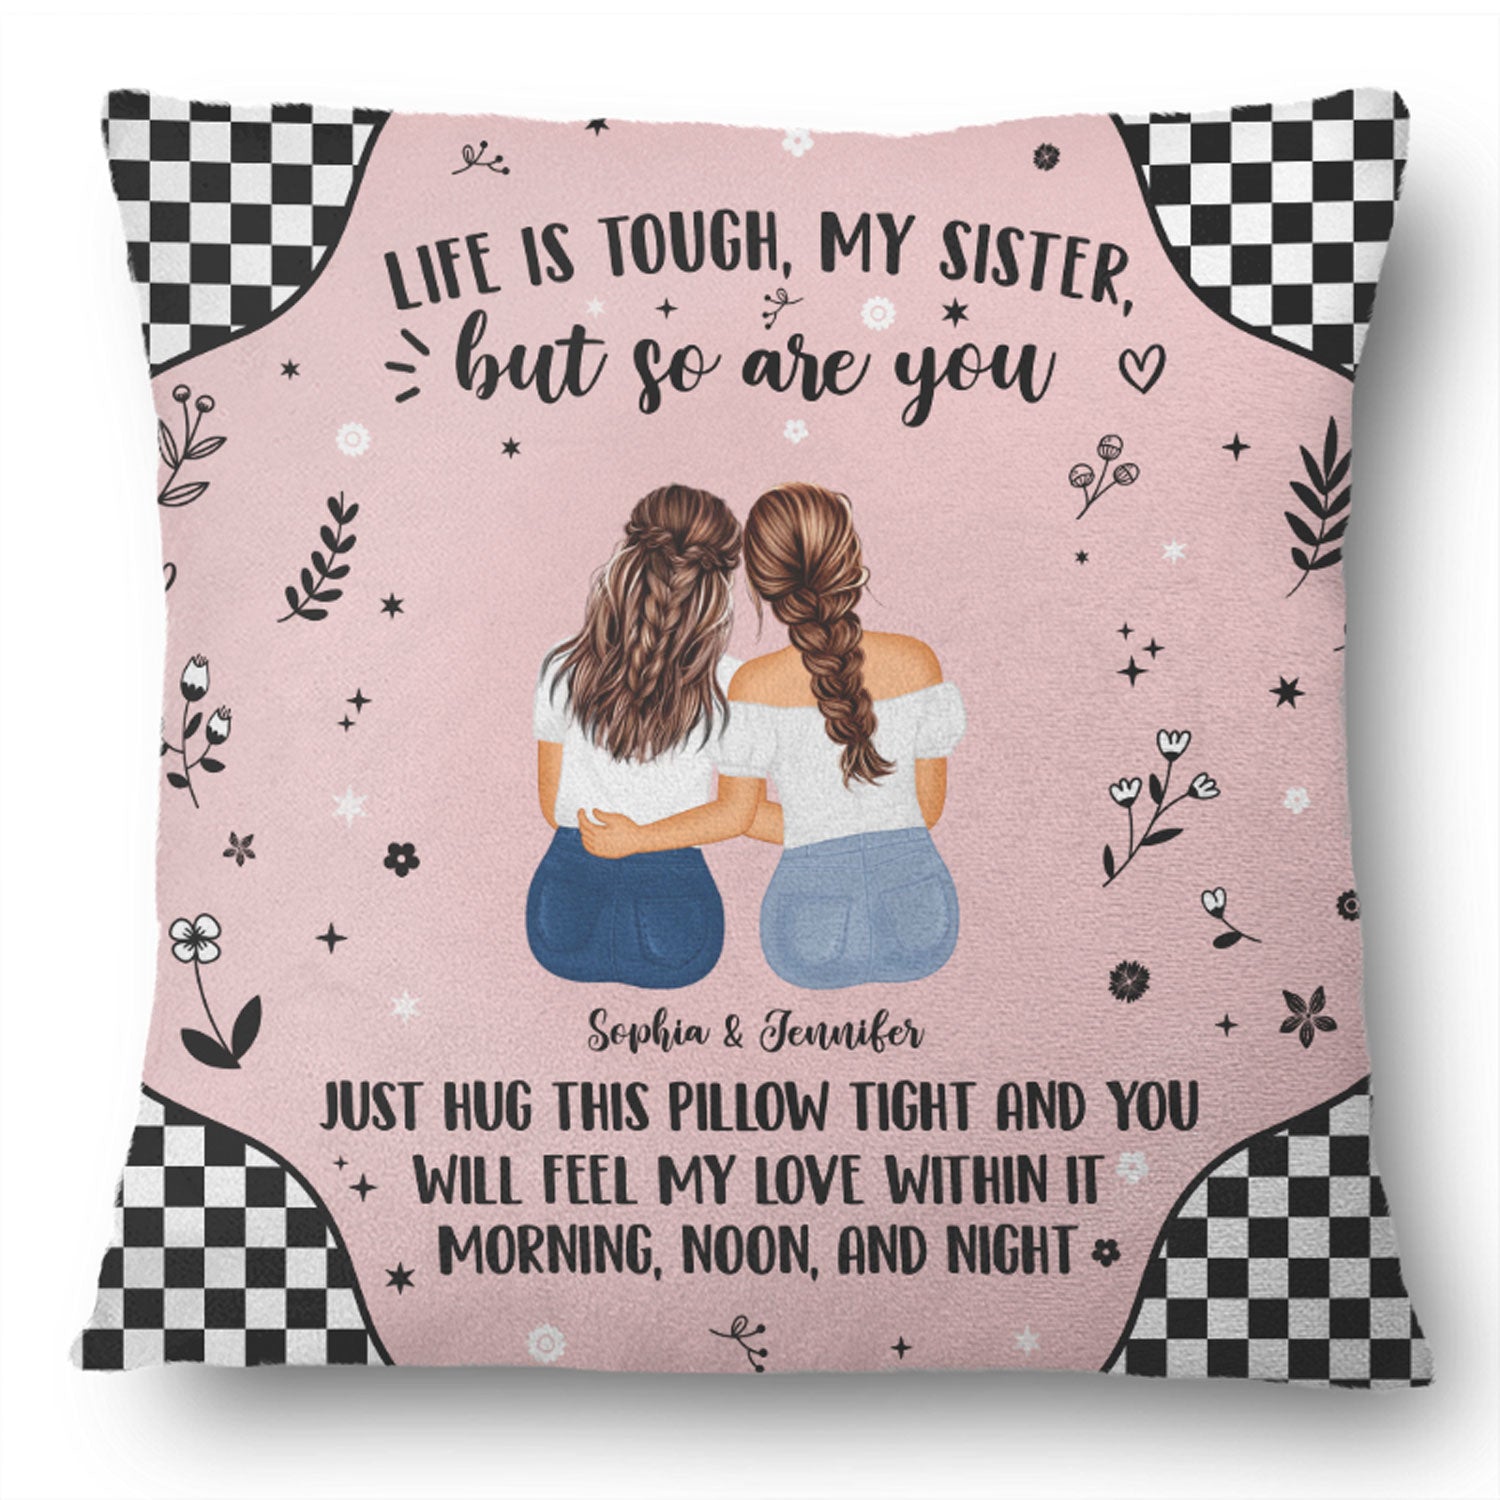 Life Is Tough - Gift For Sister - Personalized Pillow